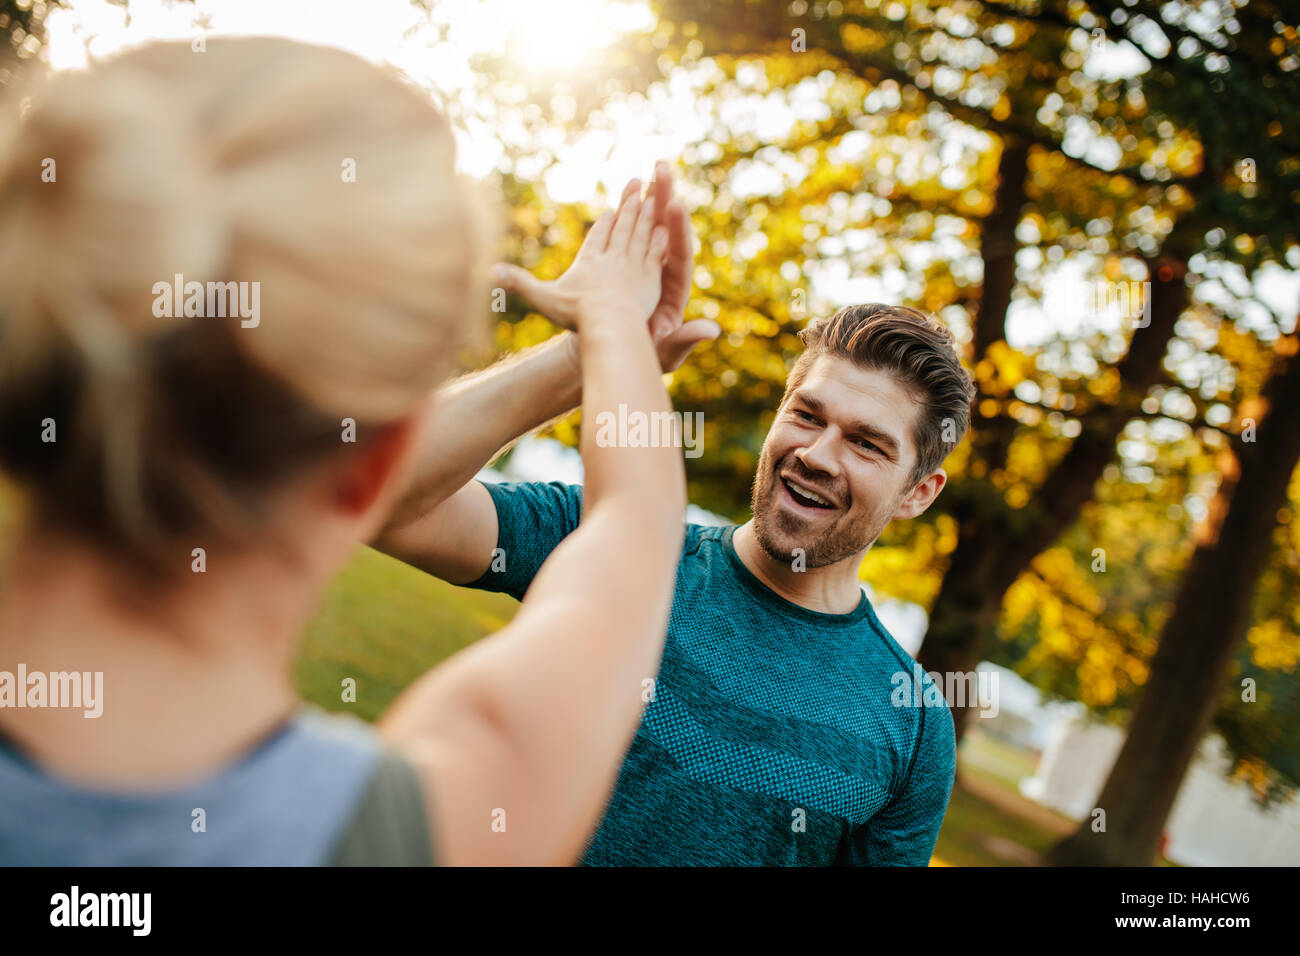 Shot of fit young man giving high five to woman. fitness couple in park giving high five. Stock Photo